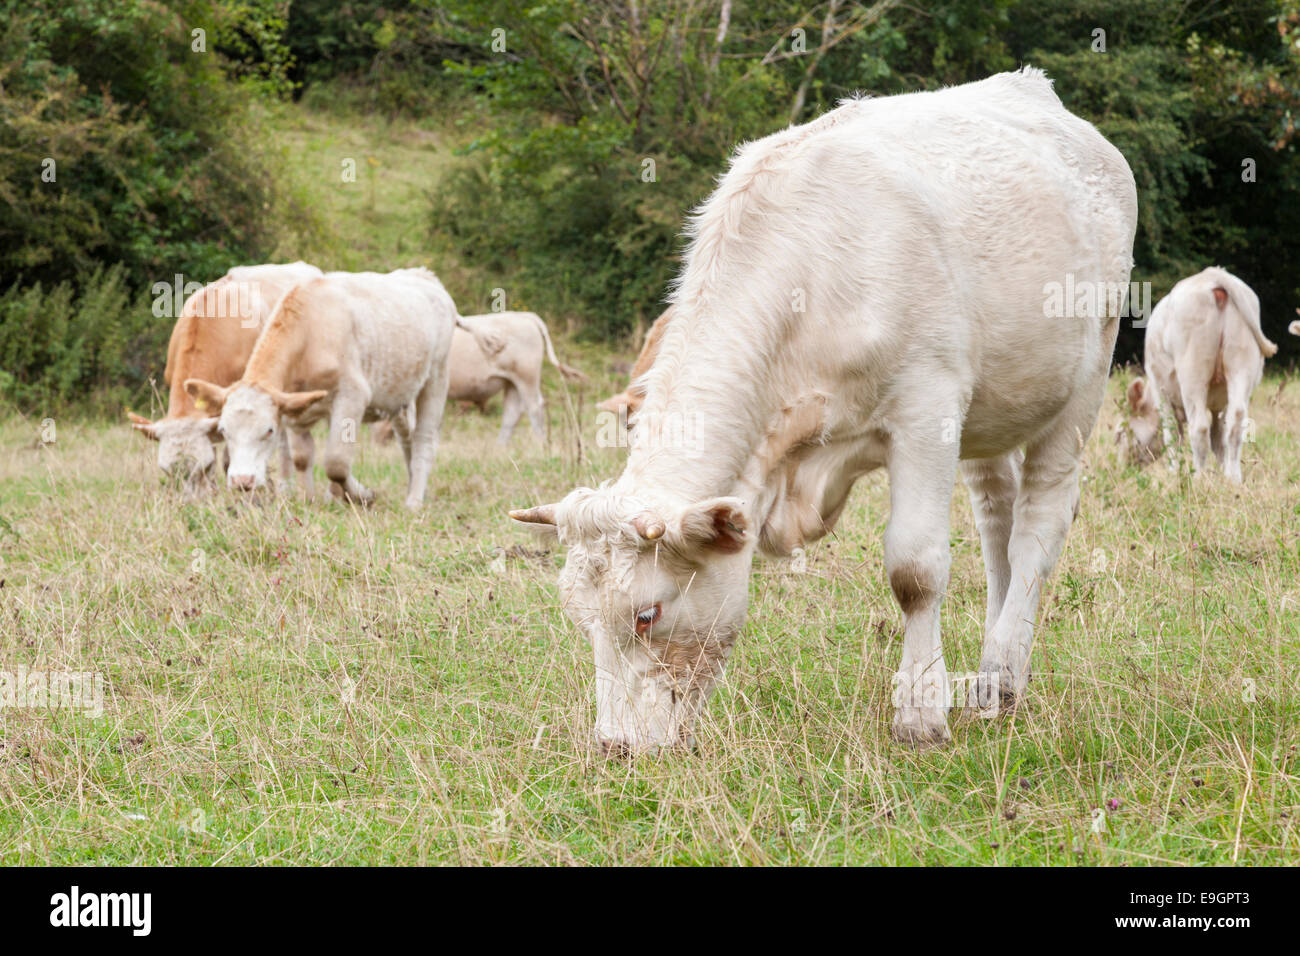 Cows grazing. Cattle in a field at Monsal Dale, Derbyshire, Peak District National Park, England, UK Stock Photo